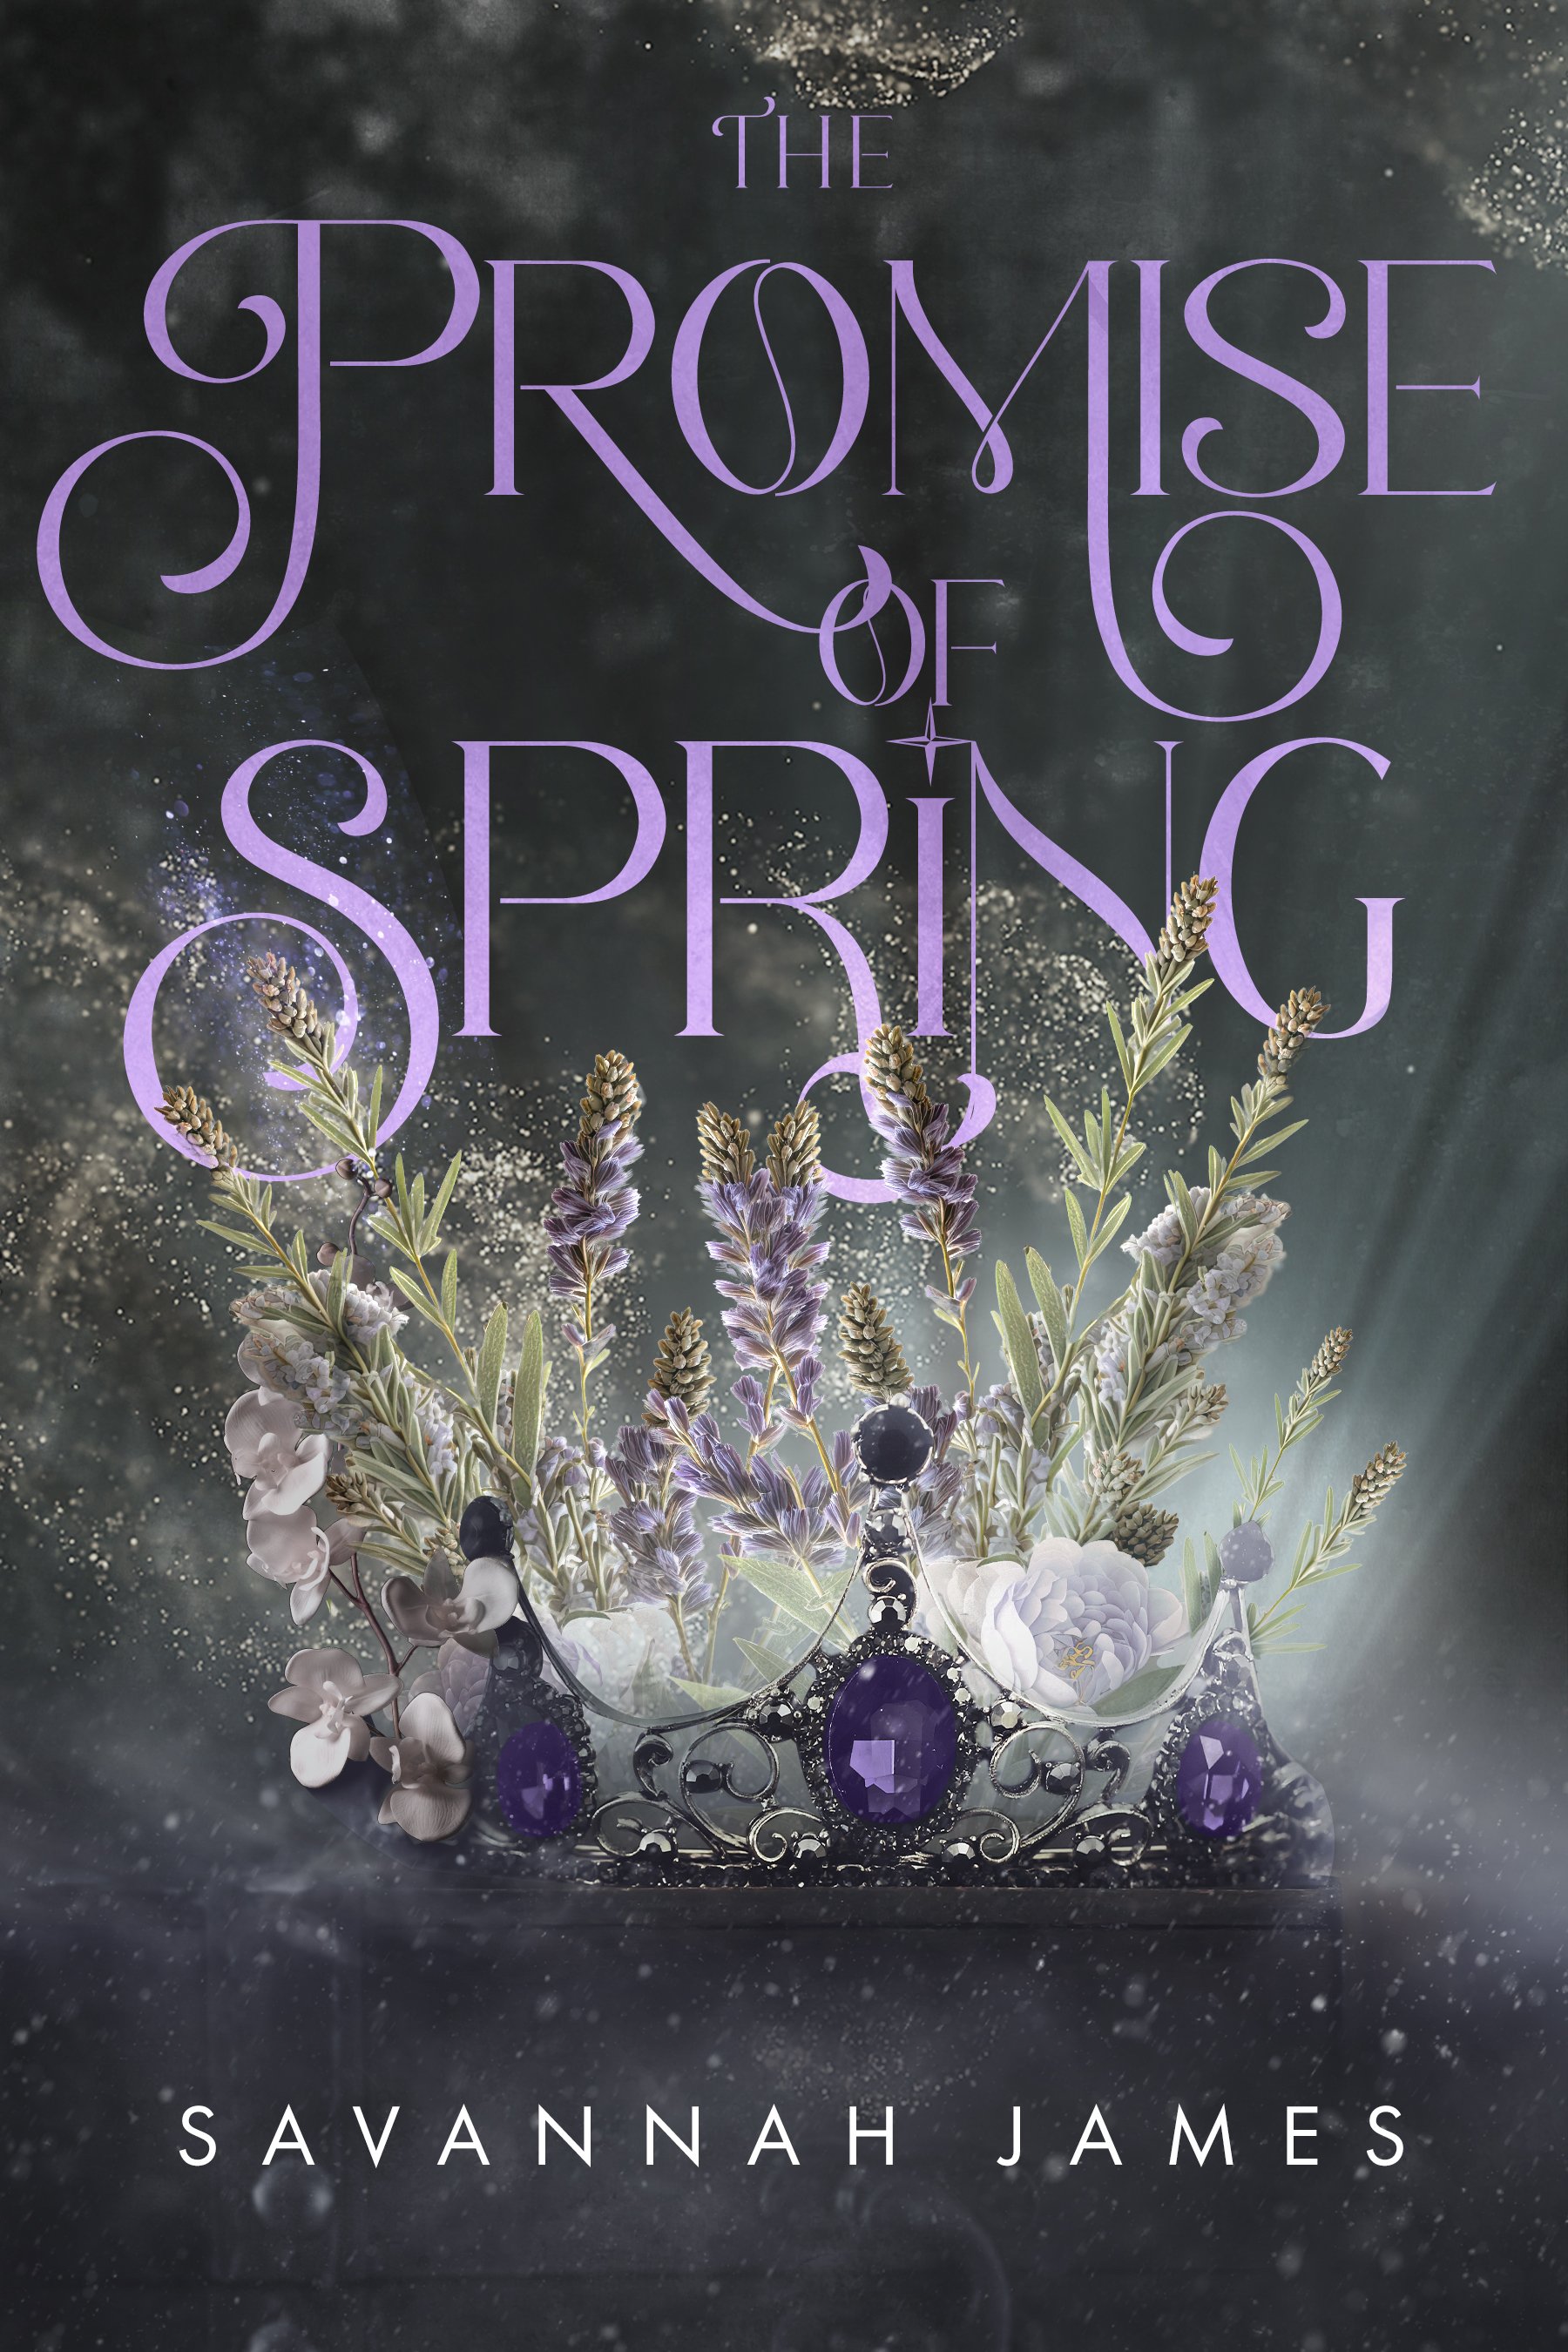 The Promise of Spring-ebook cover.jpg